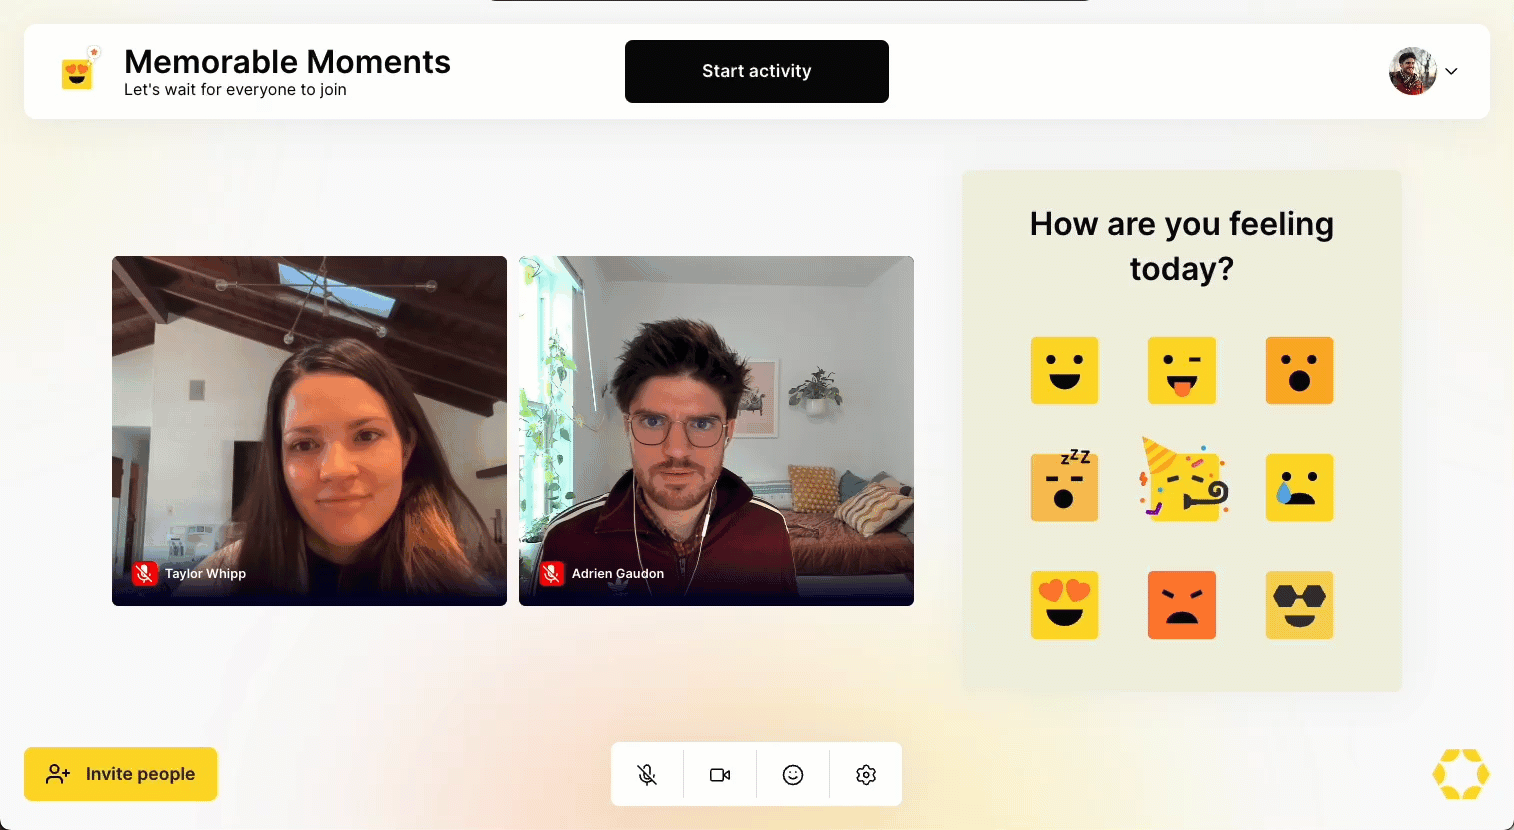 Show who’s online with you and send reactions in real-time